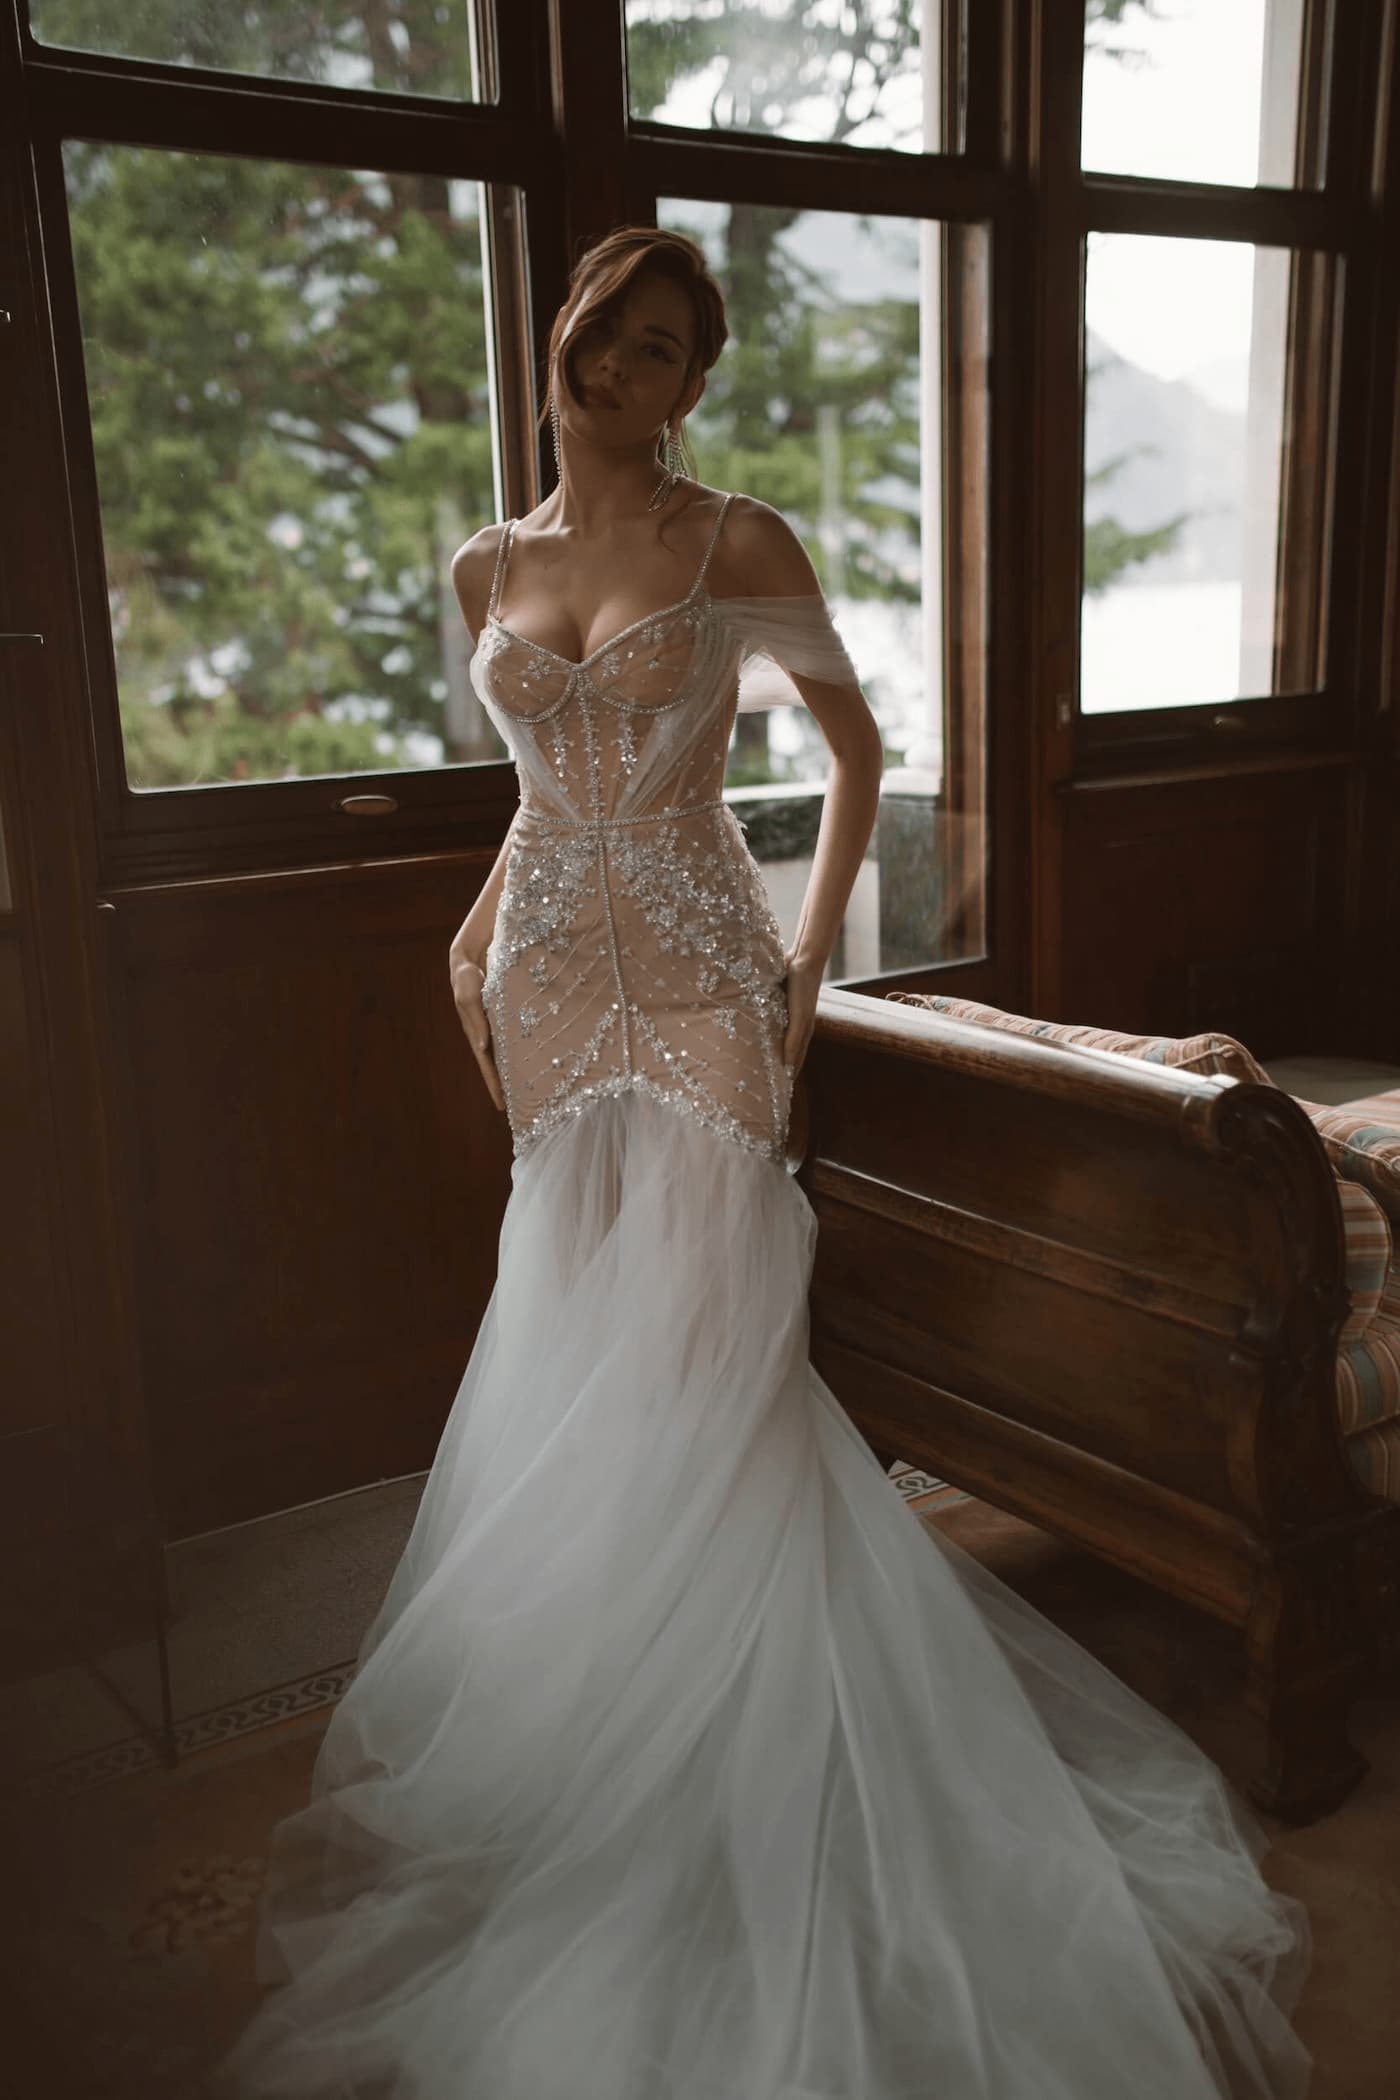 Wedding Dresses For Every Body Type